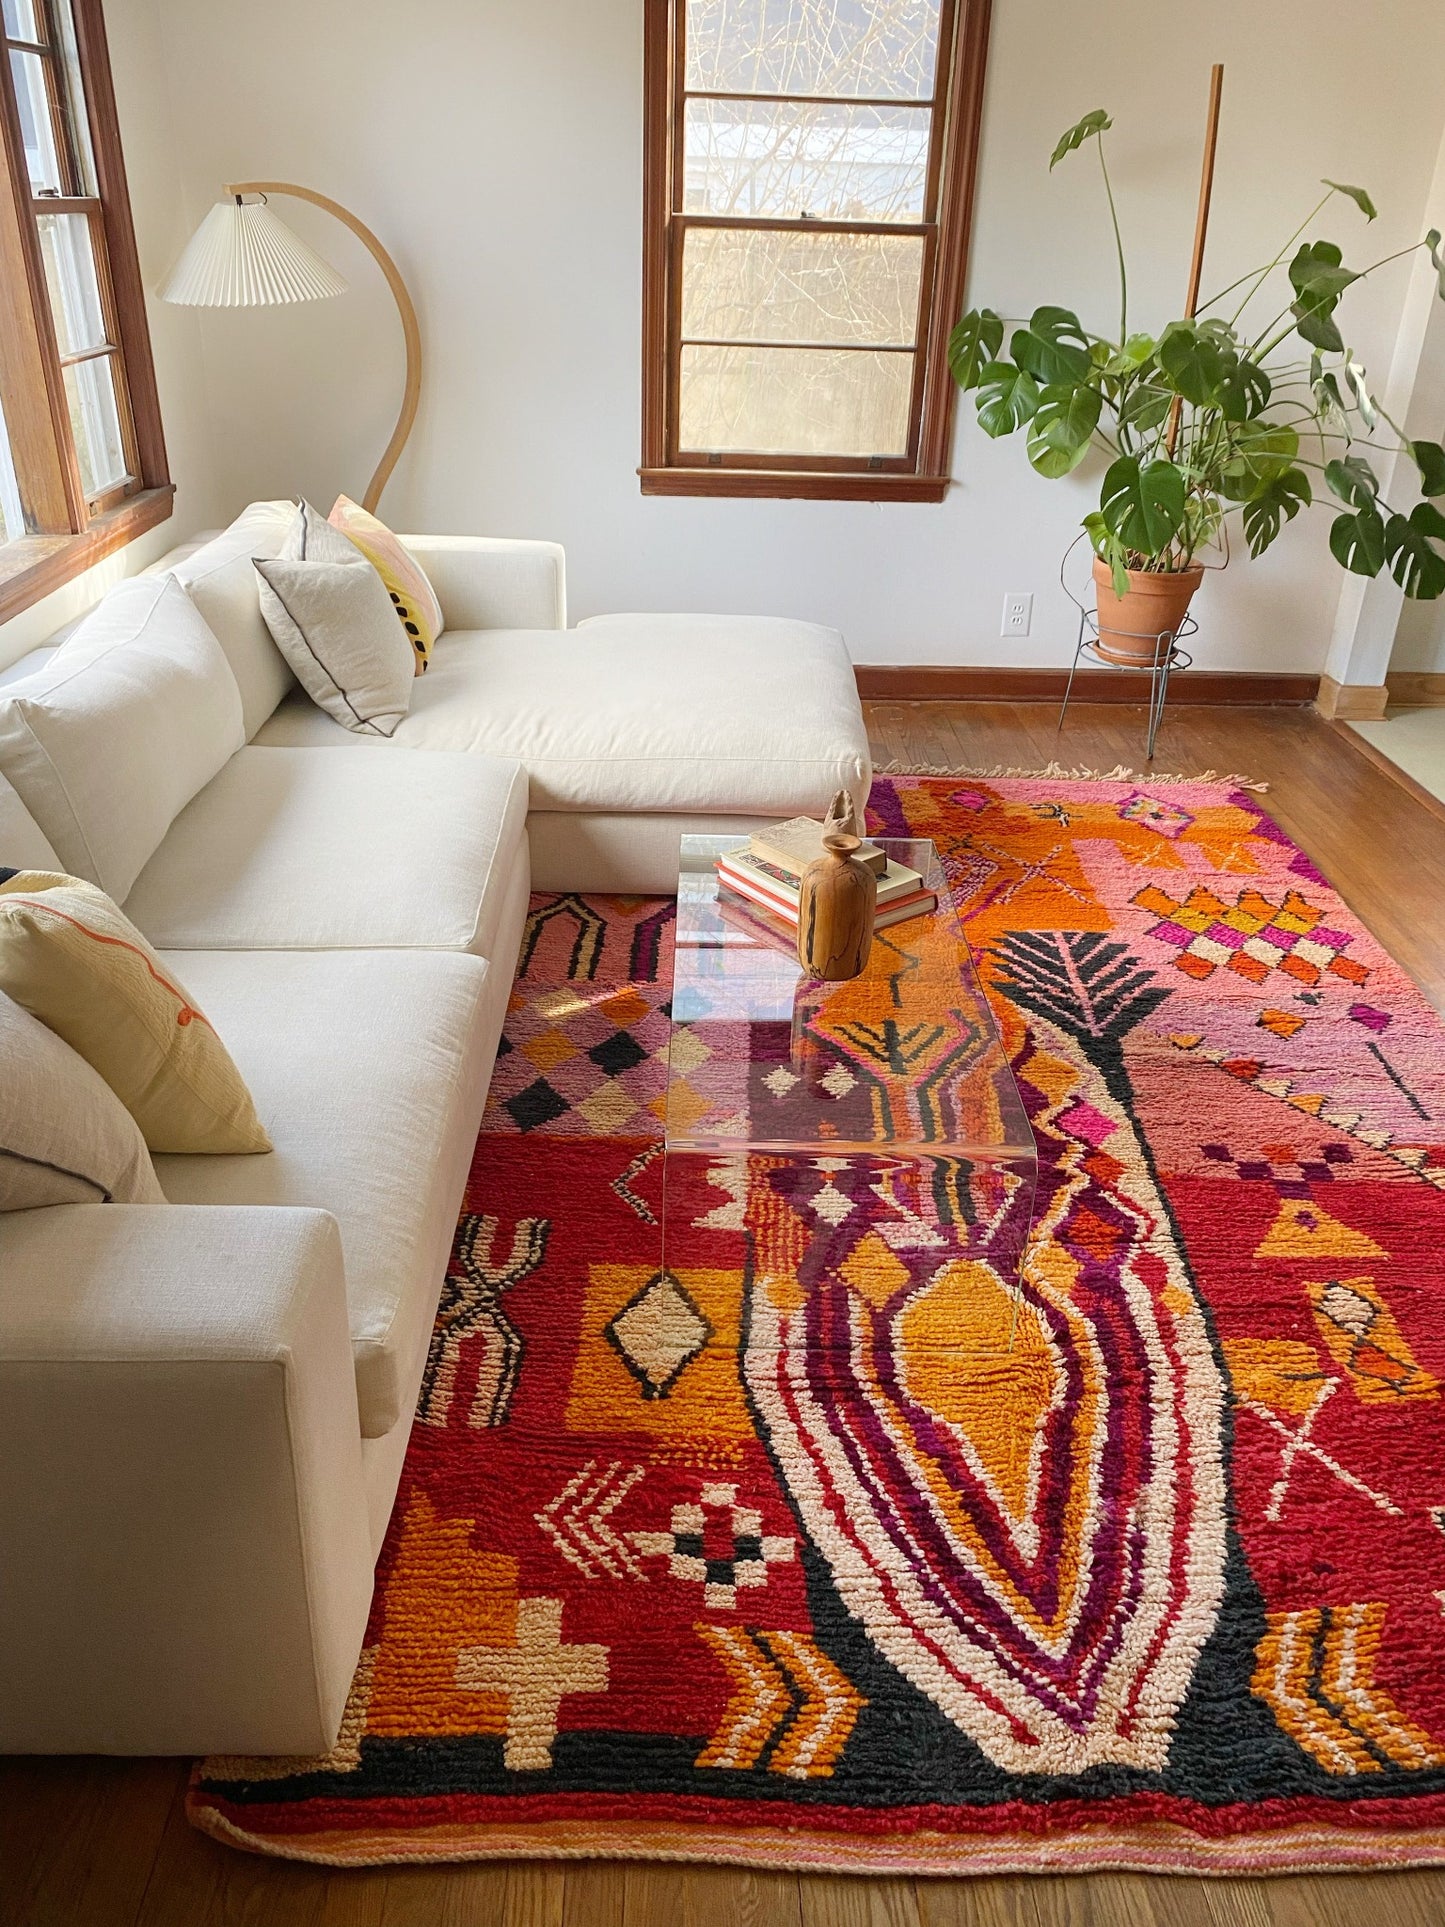 See Wedelia Moroccan Rug Styled with a Sectional Couch